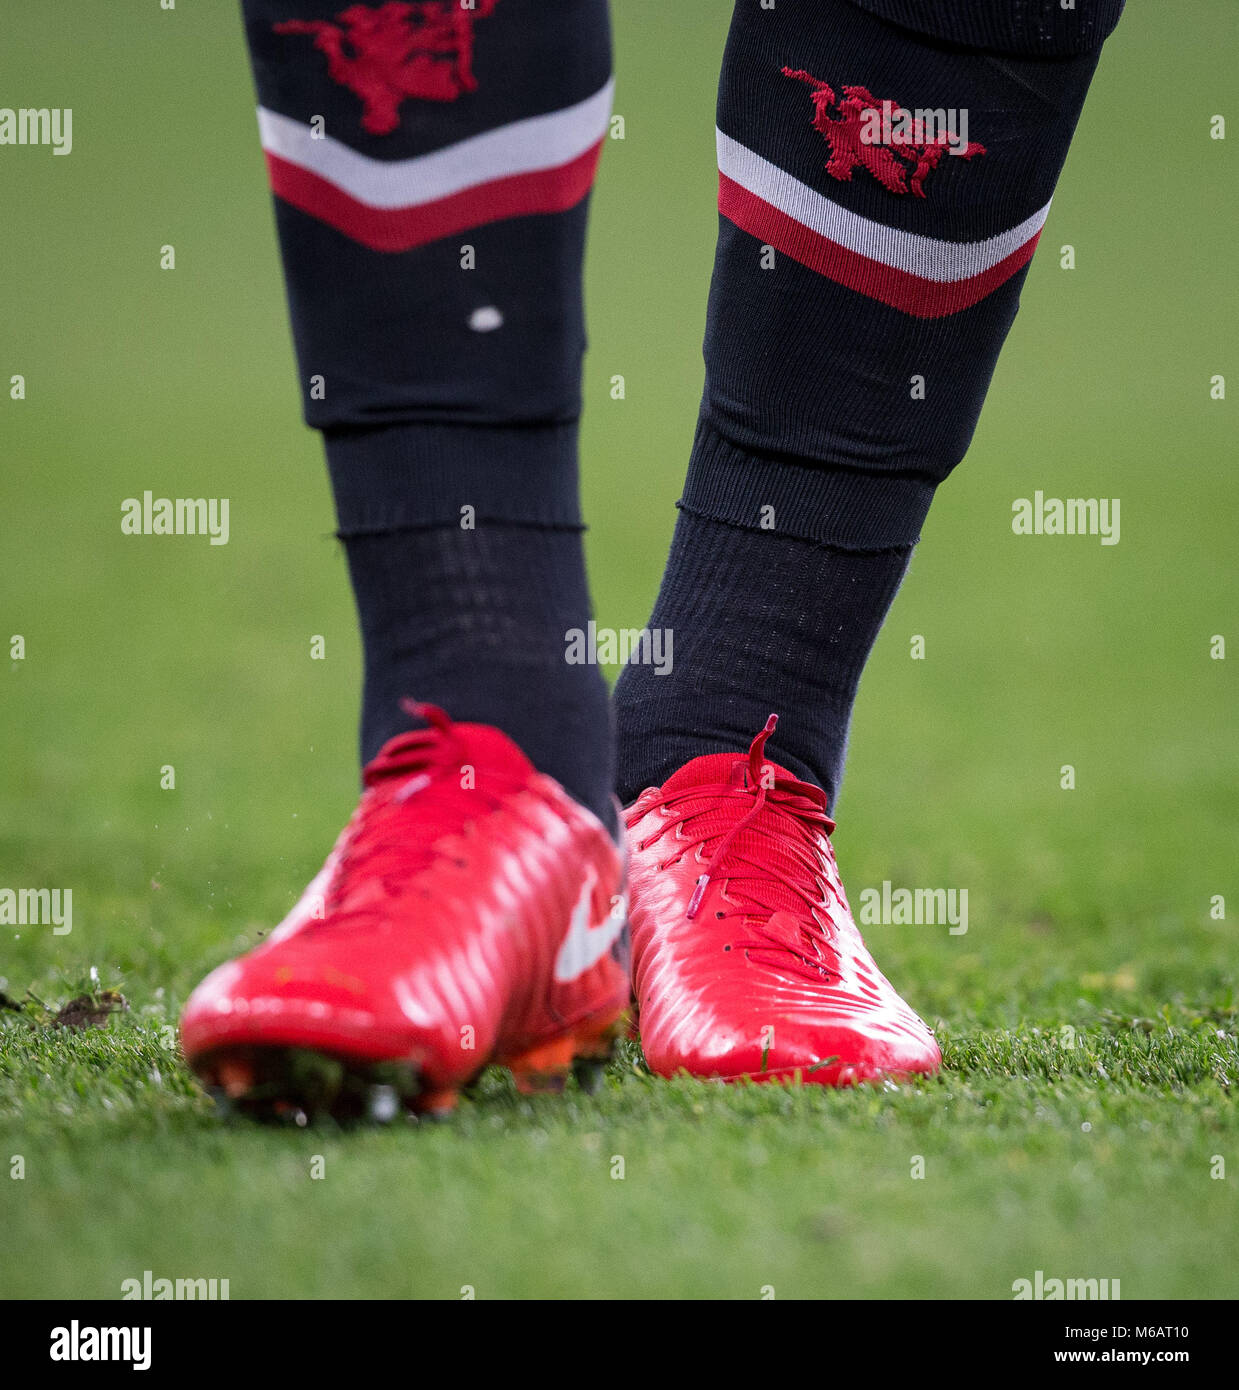 Marouane Fellaini of Man Utd personalised Nike football boots during the EPL - Premier League match between Chelsea and Manchester United at Stamford  Stock Photo